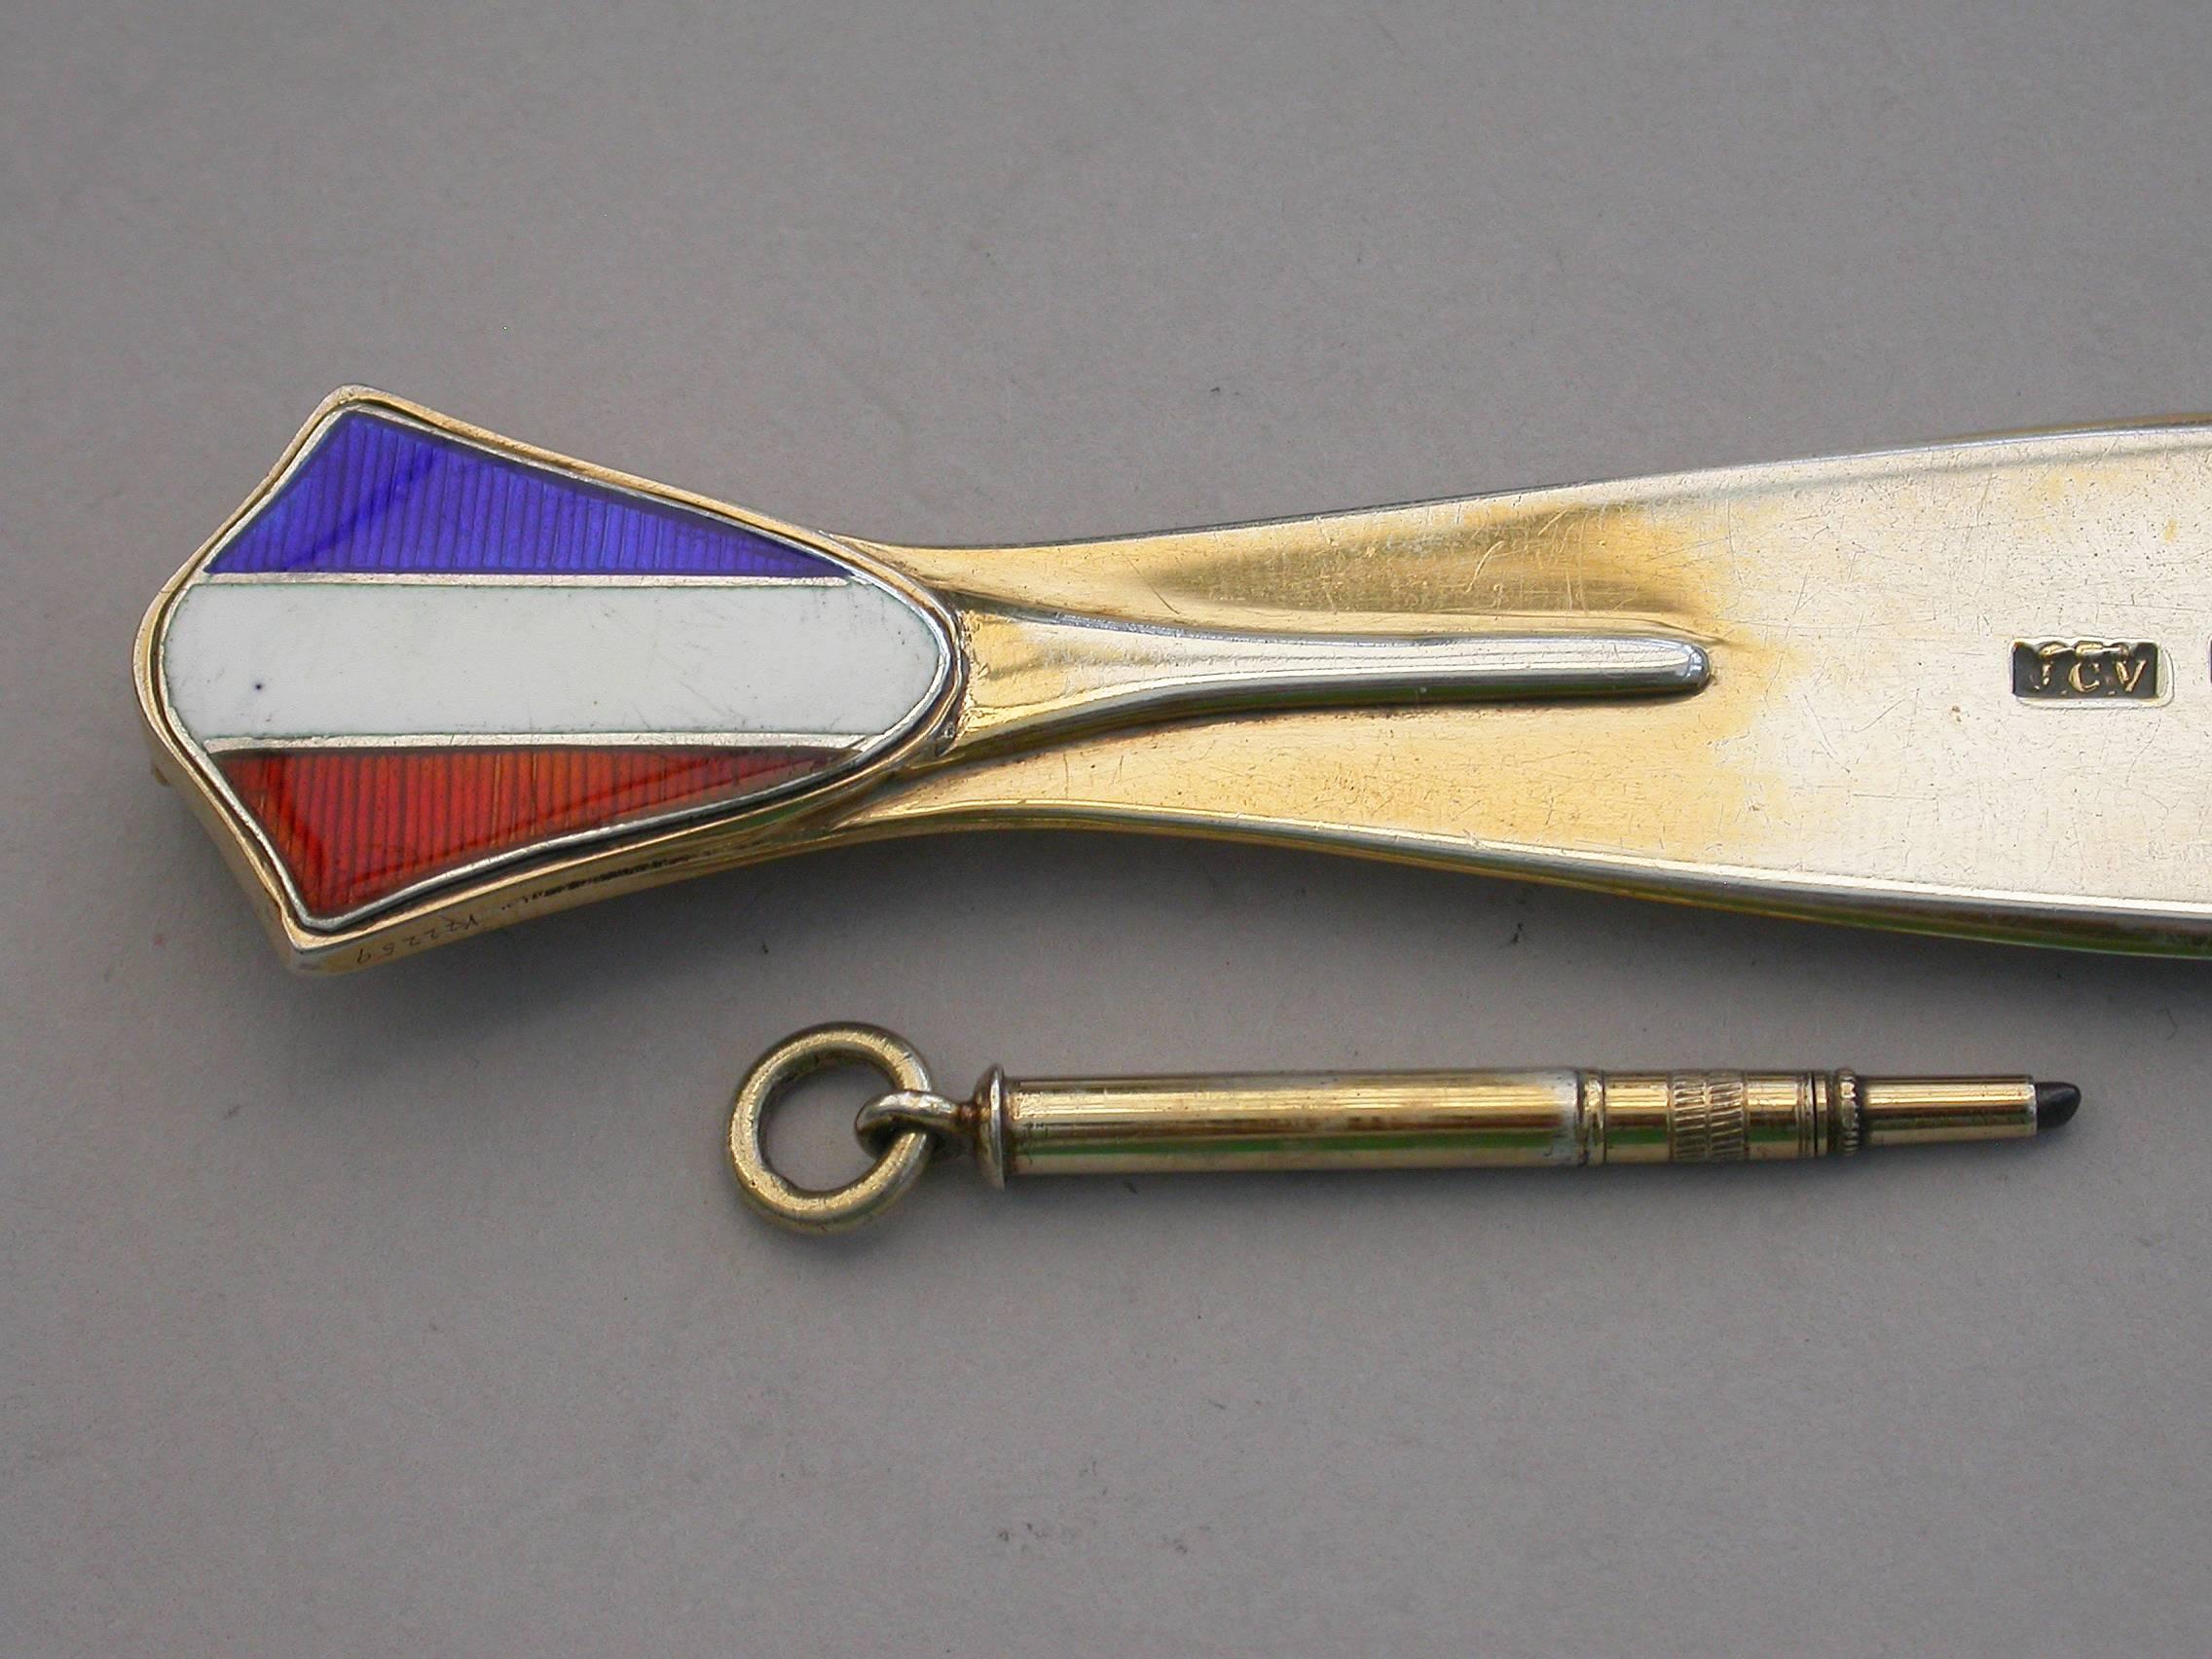 Enamelled French Tricolor Flag Silver Gilt Bookmark / Pencil, J C Vickery, 1916 For Sale 2